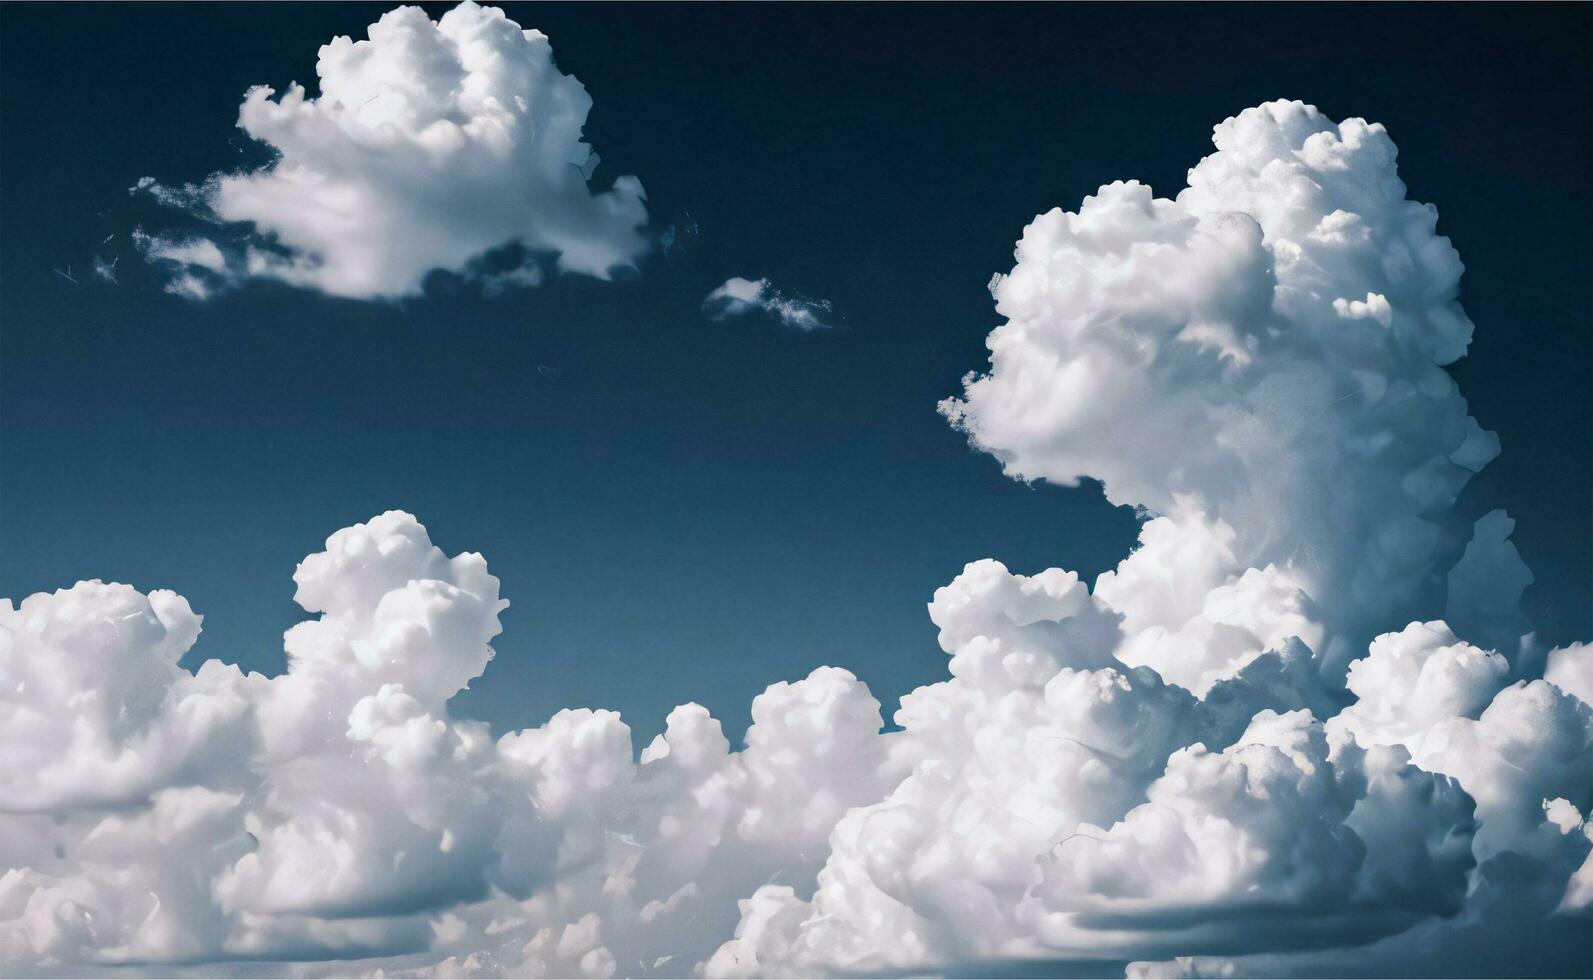 The Photo of the Fluffy Clouds Background Wallpaper